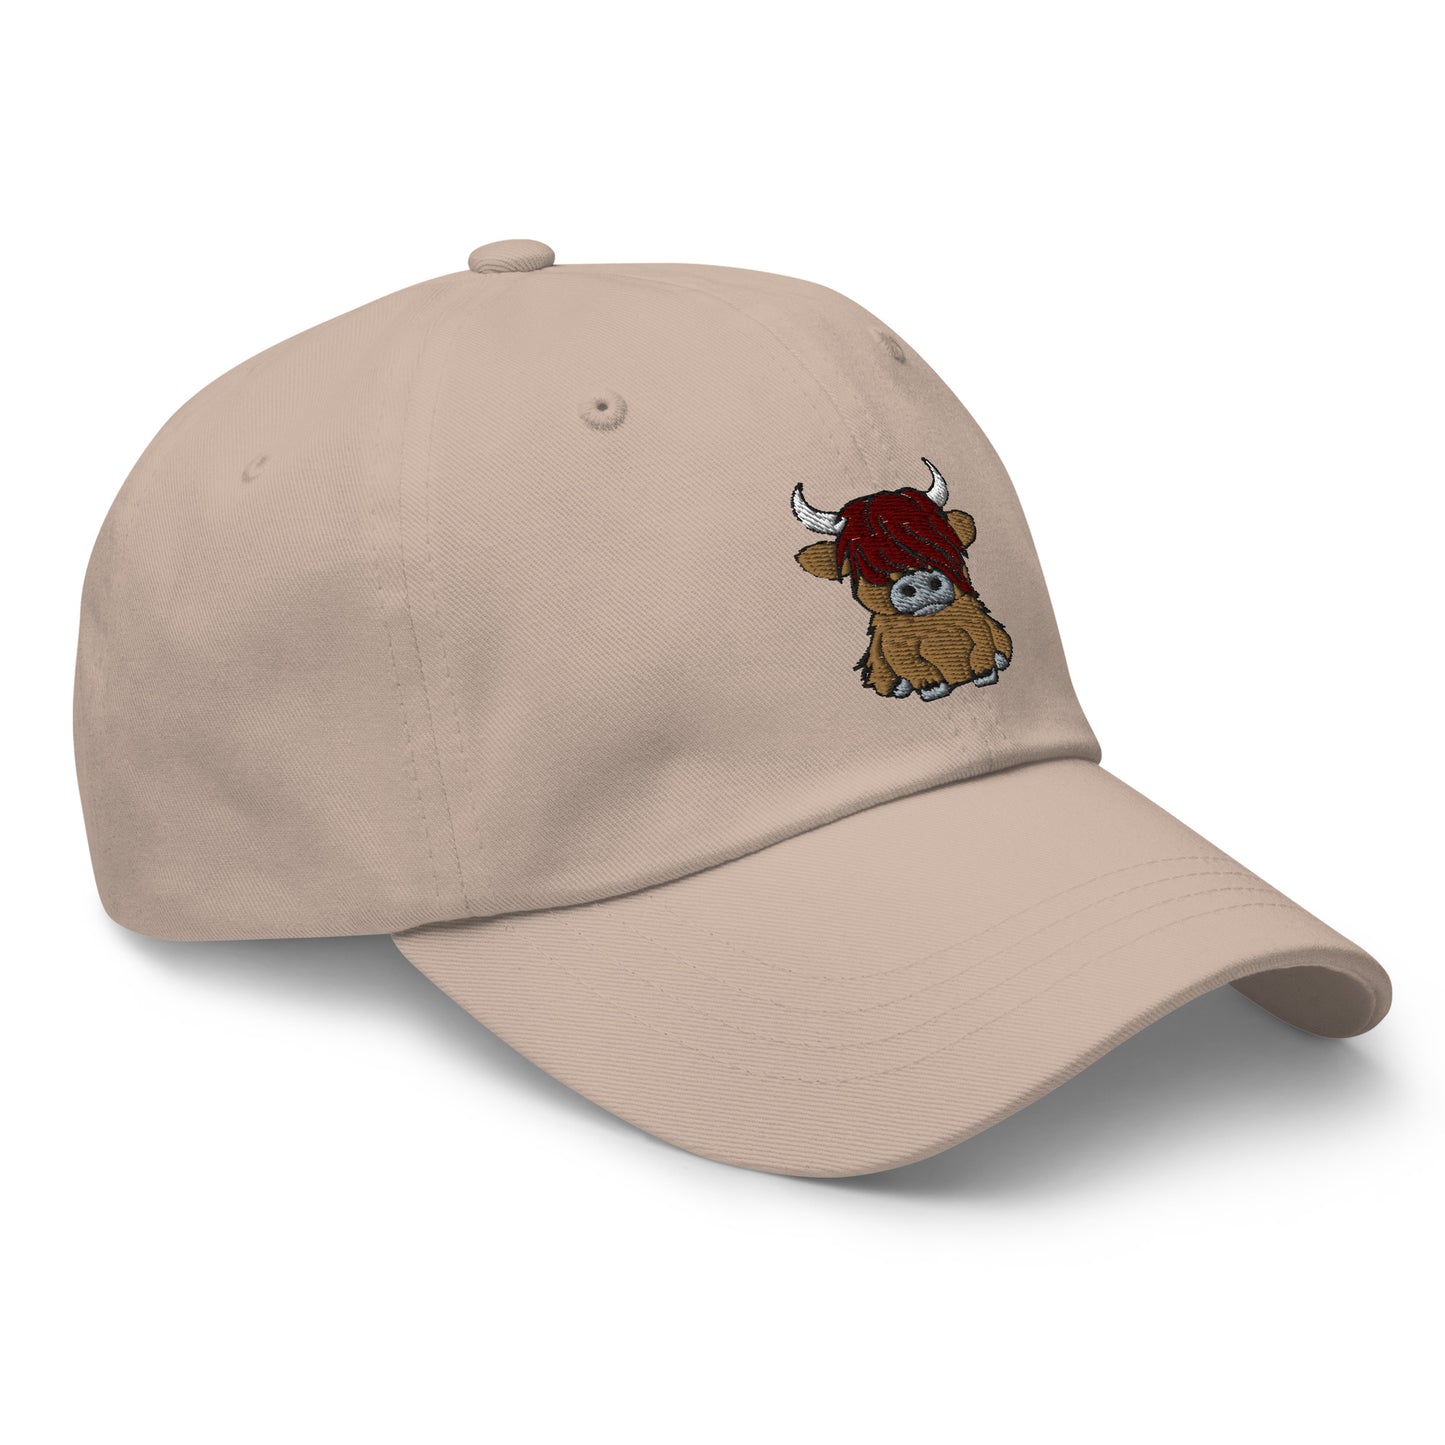 Scottish Highland Cow Embroidered Dad Hat - The Global Wanderer